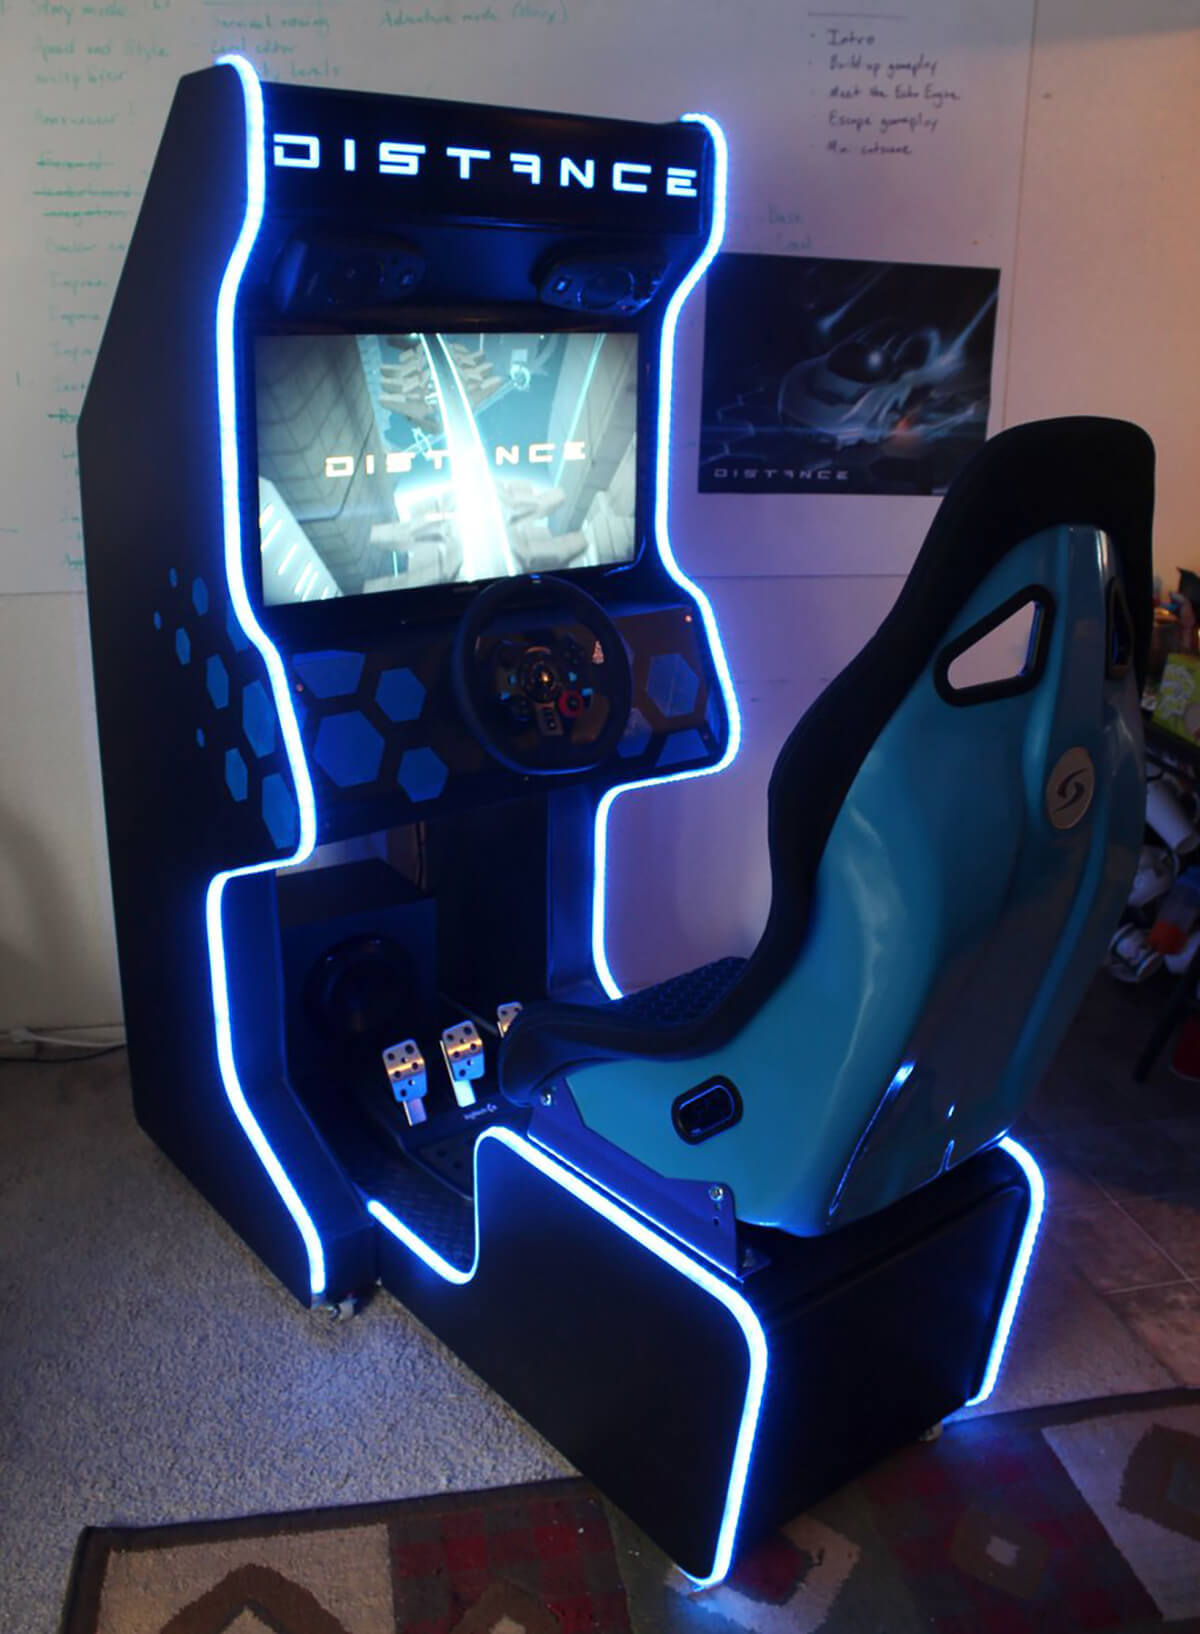 A handmade Distance arcade cabinet ready for delivery to a Kickstarter backer